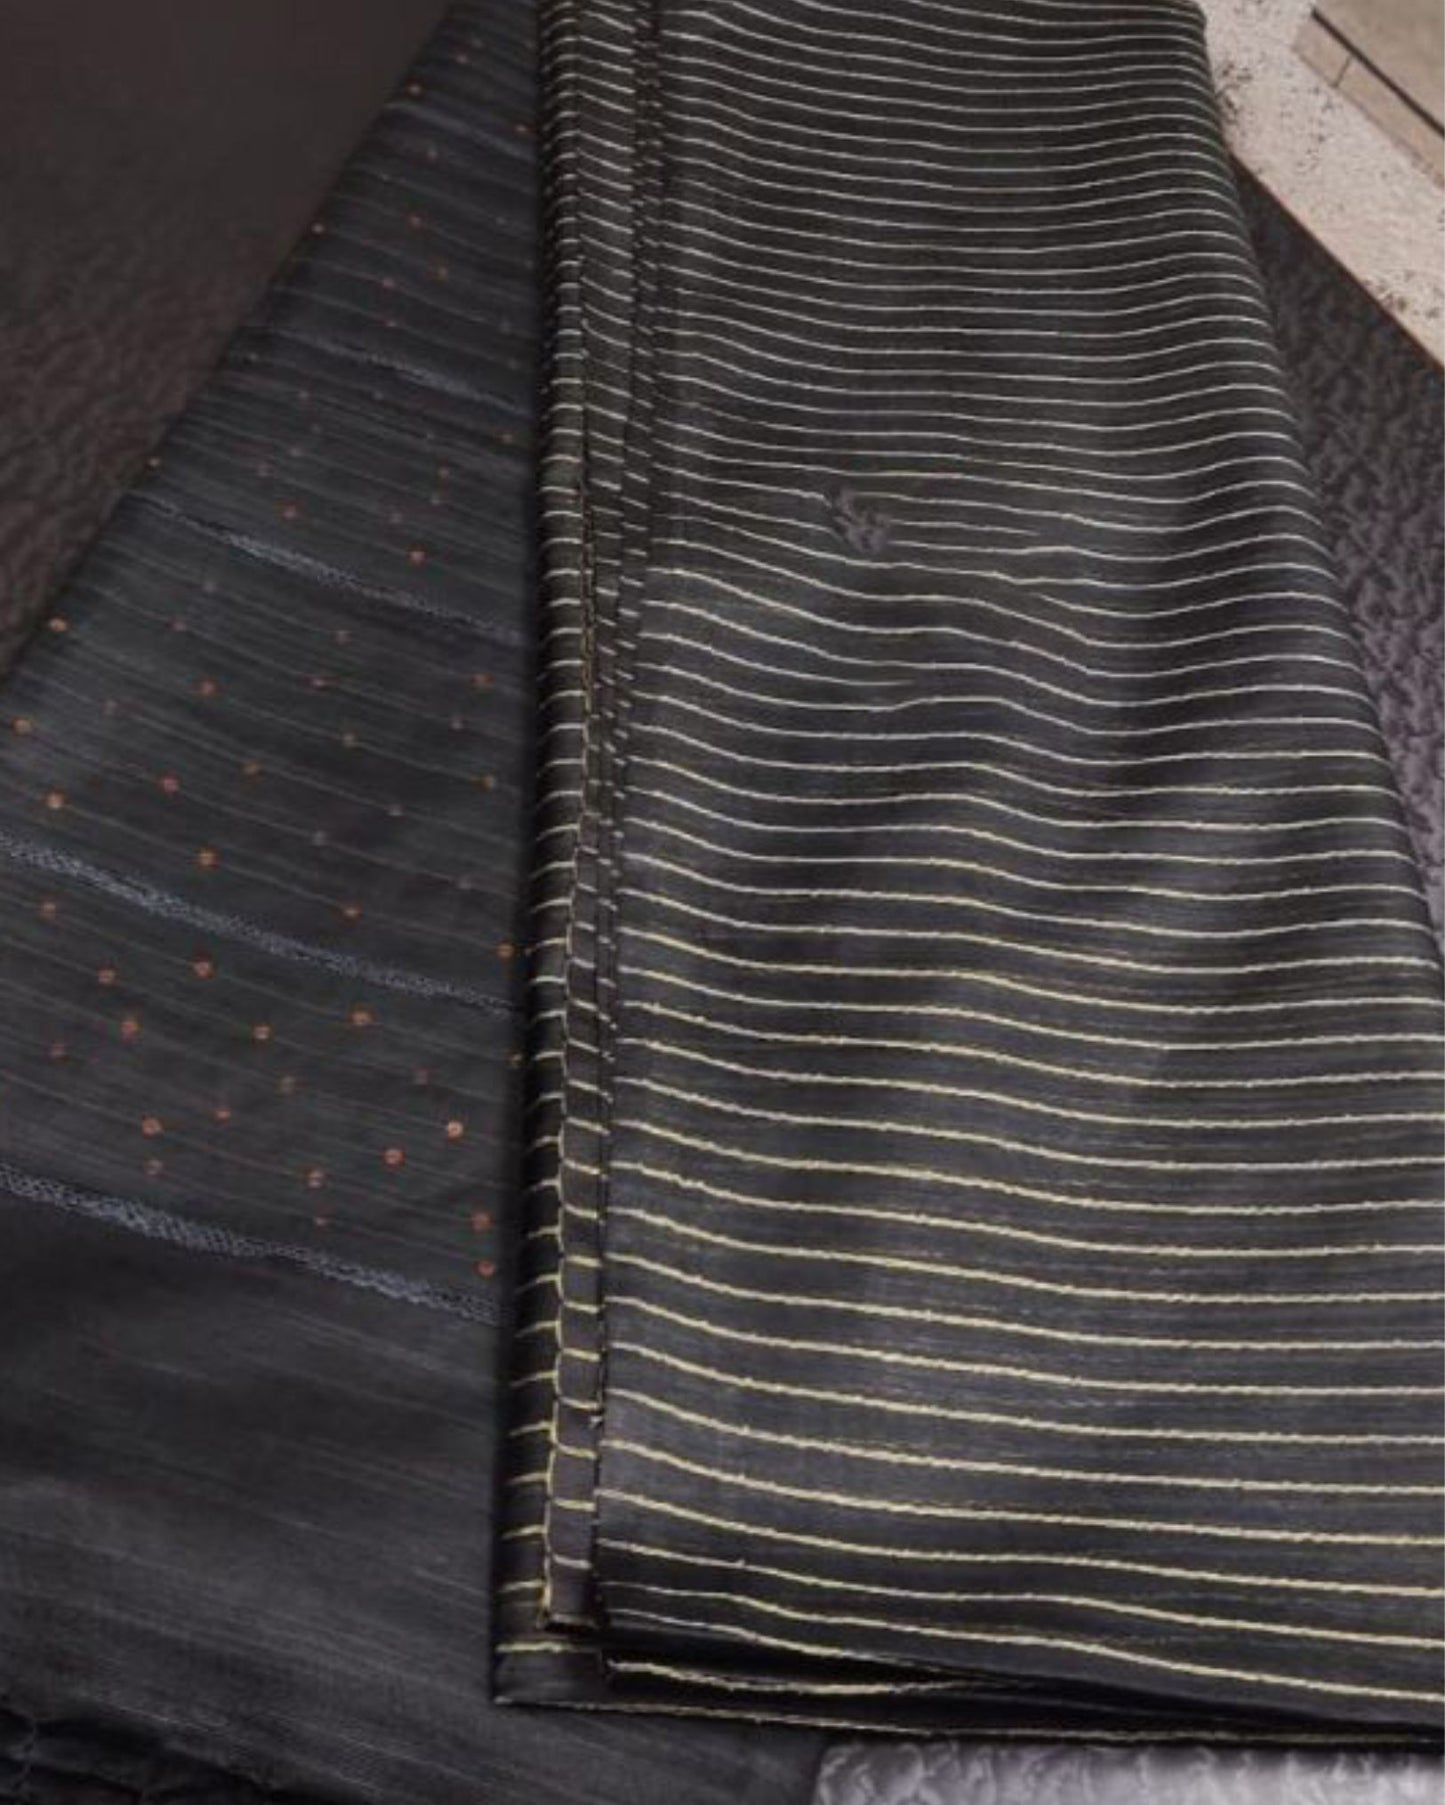 3330-Katan Silk Saree Striped Payne's Grey Design with Running Blouse Handcrafted